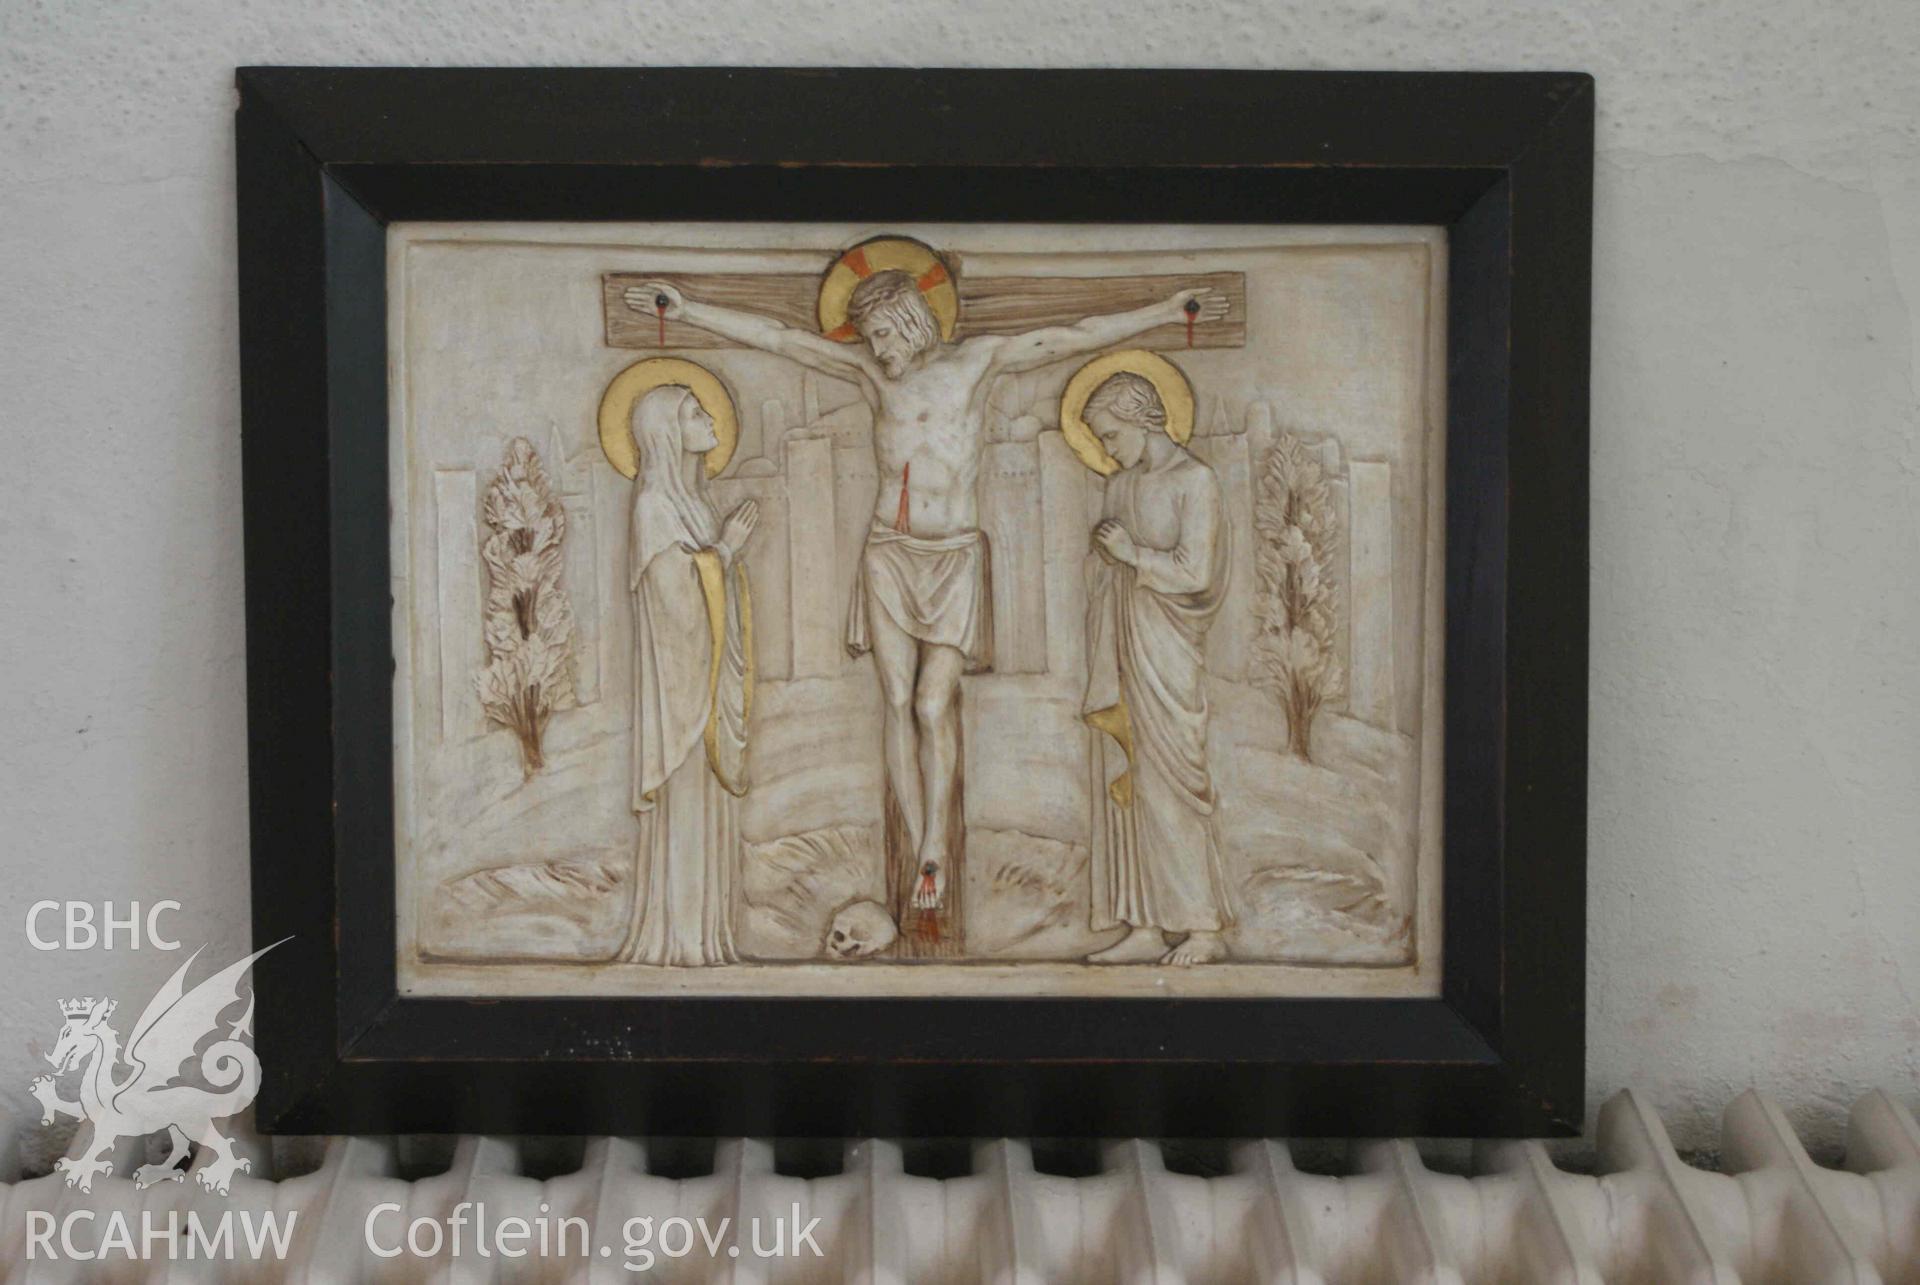 Digital colour photograph showing framed low-relief plaster depiction of the Crucifixion at St Mary's Catholic church, Abertillery.